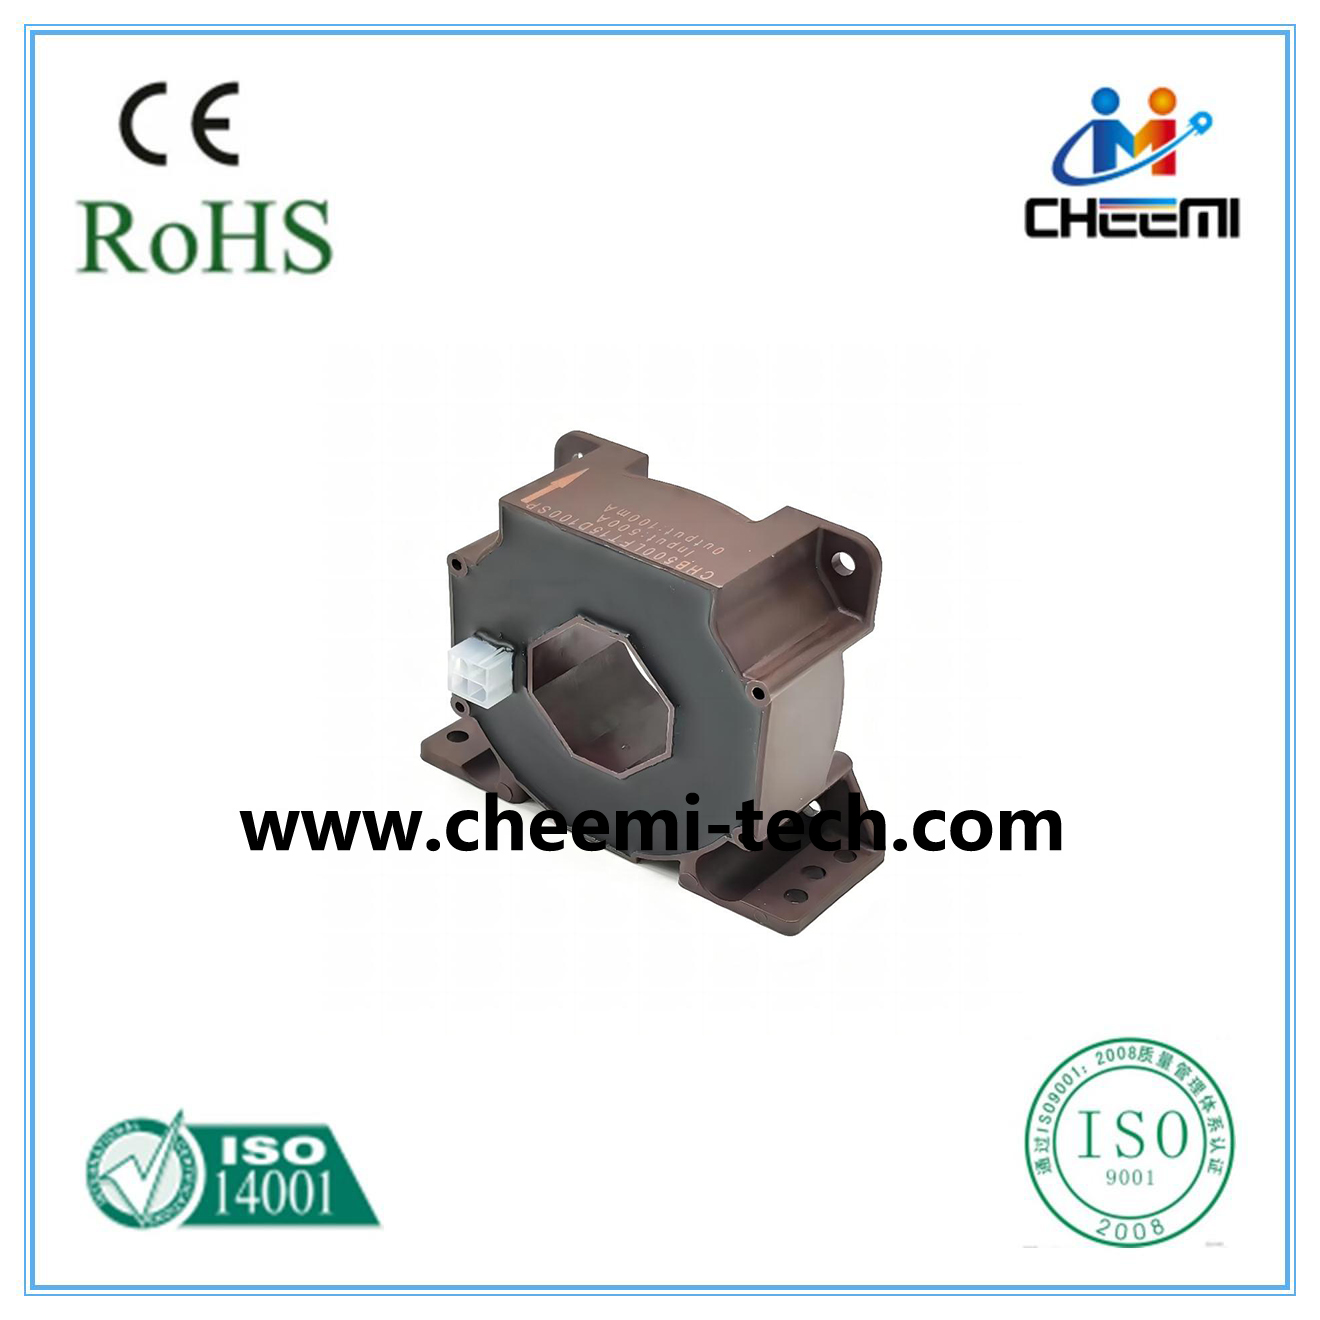 High-Accuracy-Current-Sensors-Transducers-CHB-LFT15D100S-Applied-In-railway